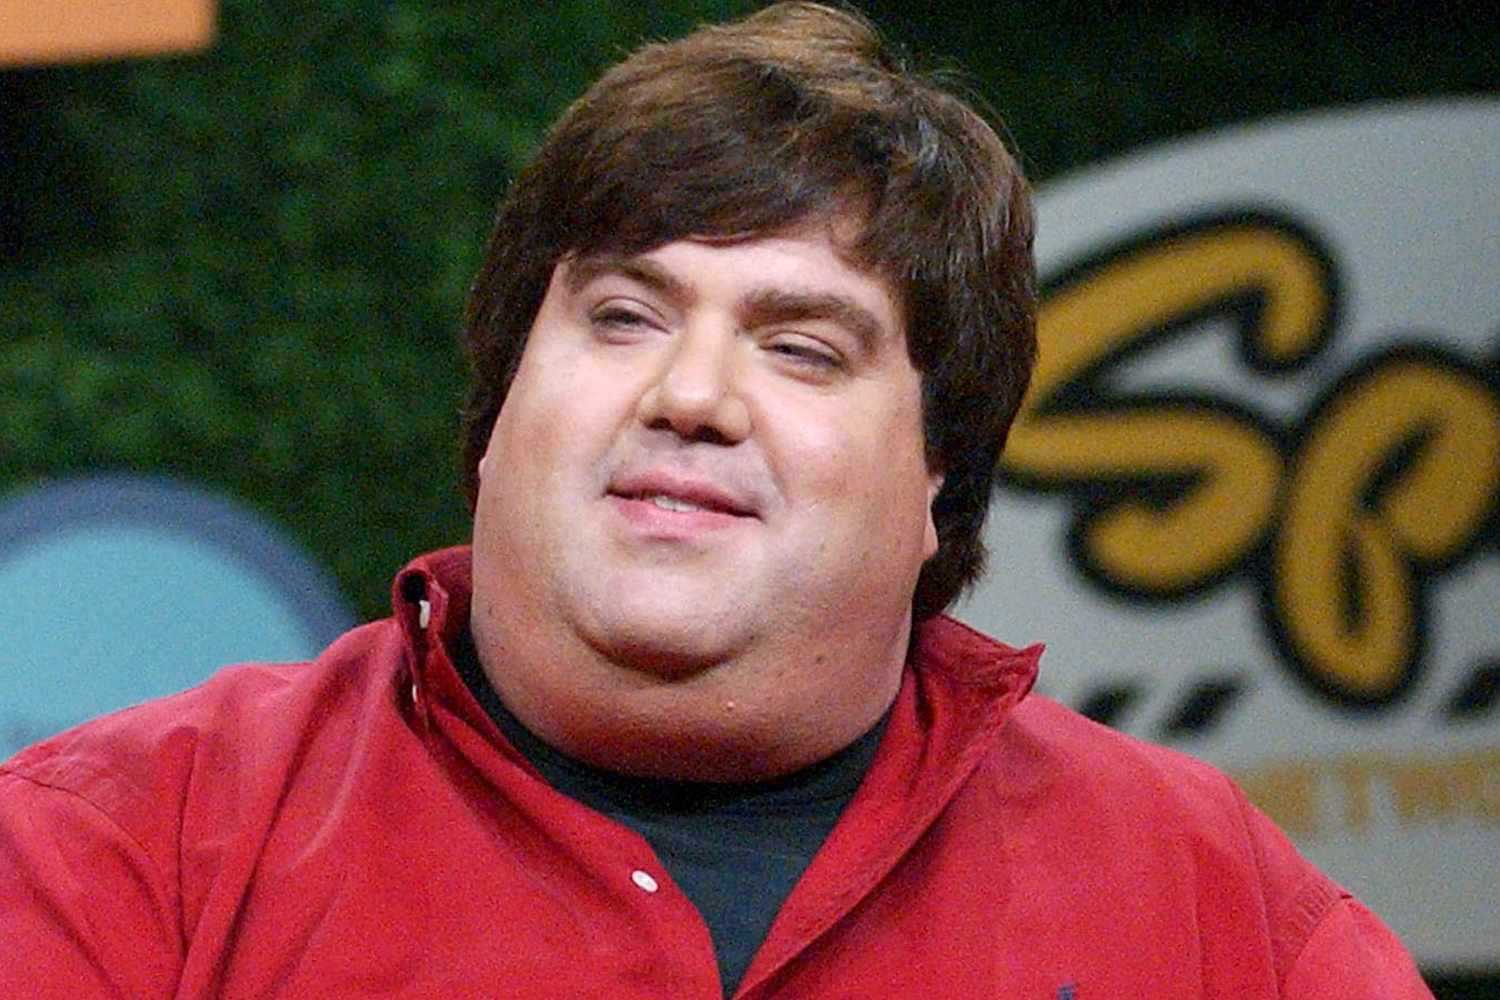 Former Nickelodeon producer Dan Schneider reacts to sexual assault claims, says 'I wish I could go back...'